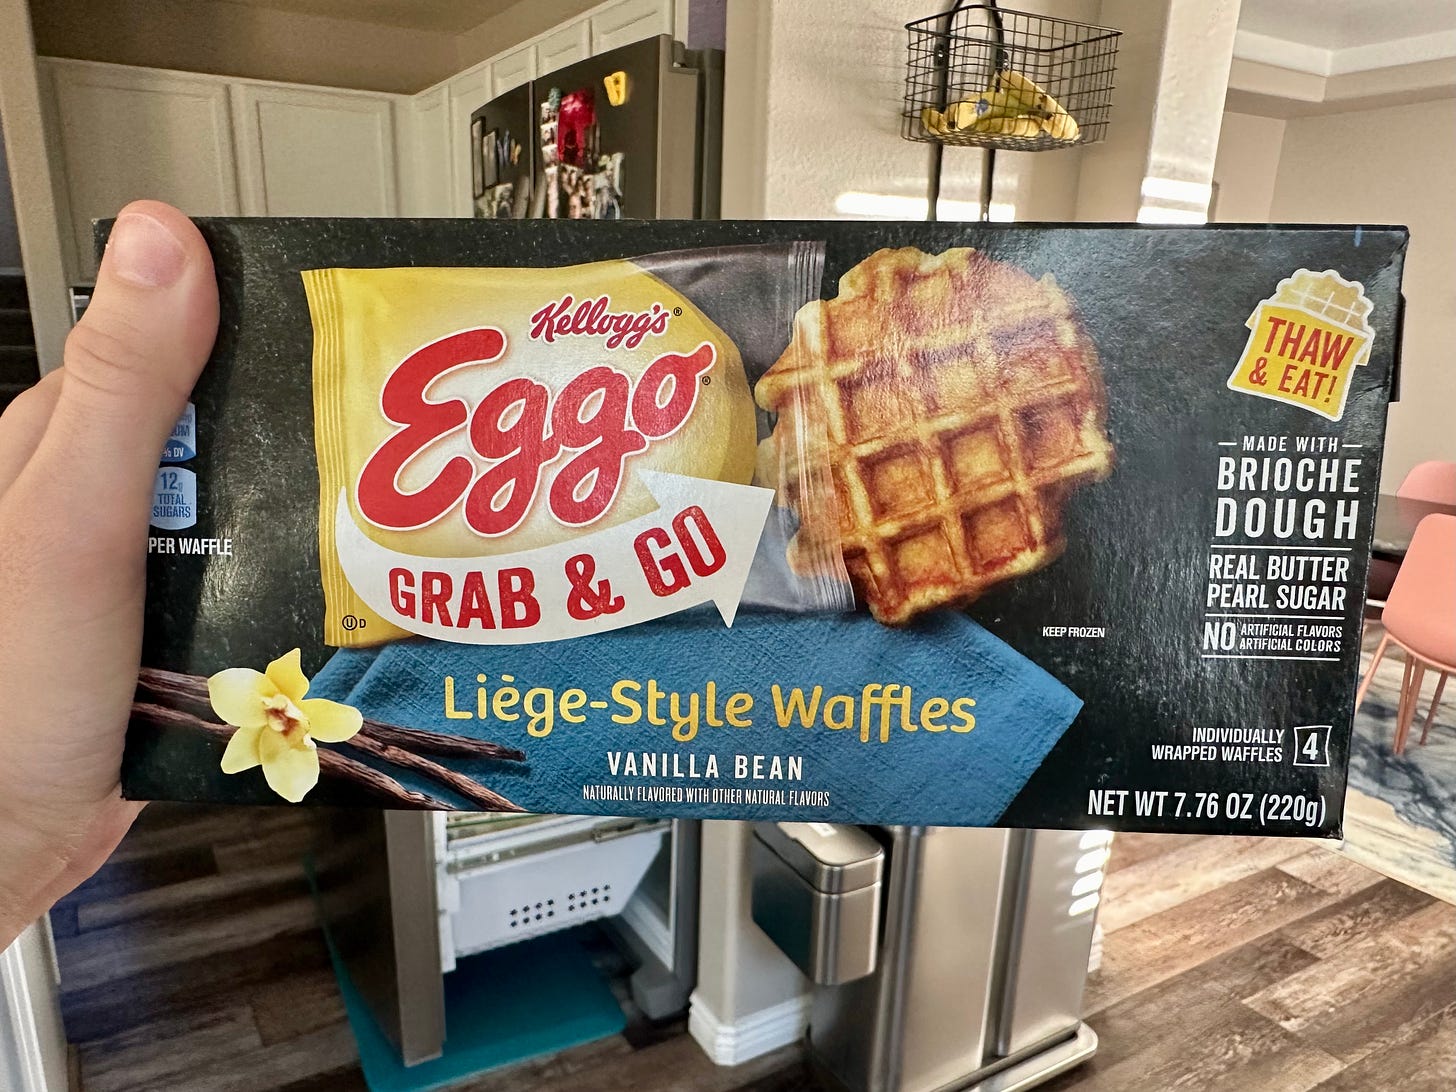 Shohreh's hand holding up a box of Eggo Grab & Go Liege-Style Waffles in Vanilla Bean